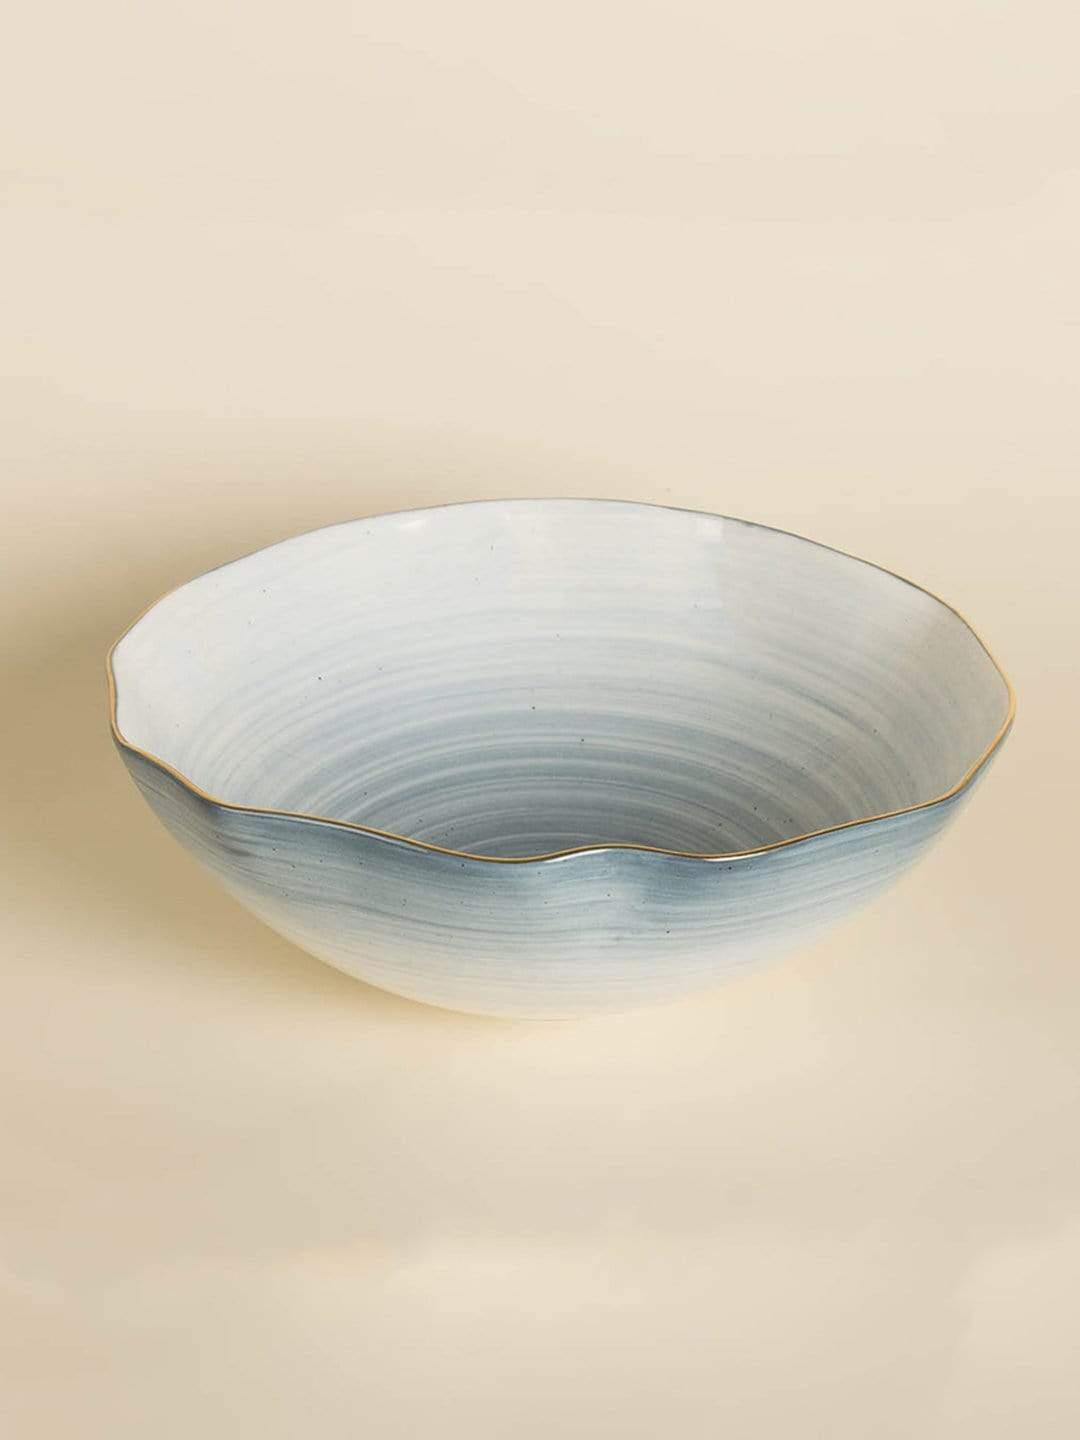 Watercolor Magic Bowl - Cerrulean BlueMaterial: CeramicsDimensions: 22d cm x 7h cmDishwasher safe, Gold rim is not Microwave safe, Do not scrub with steel wool.Will chip or break on impactOur products arWatercolor Magic Bowl - Cerrulean Blue